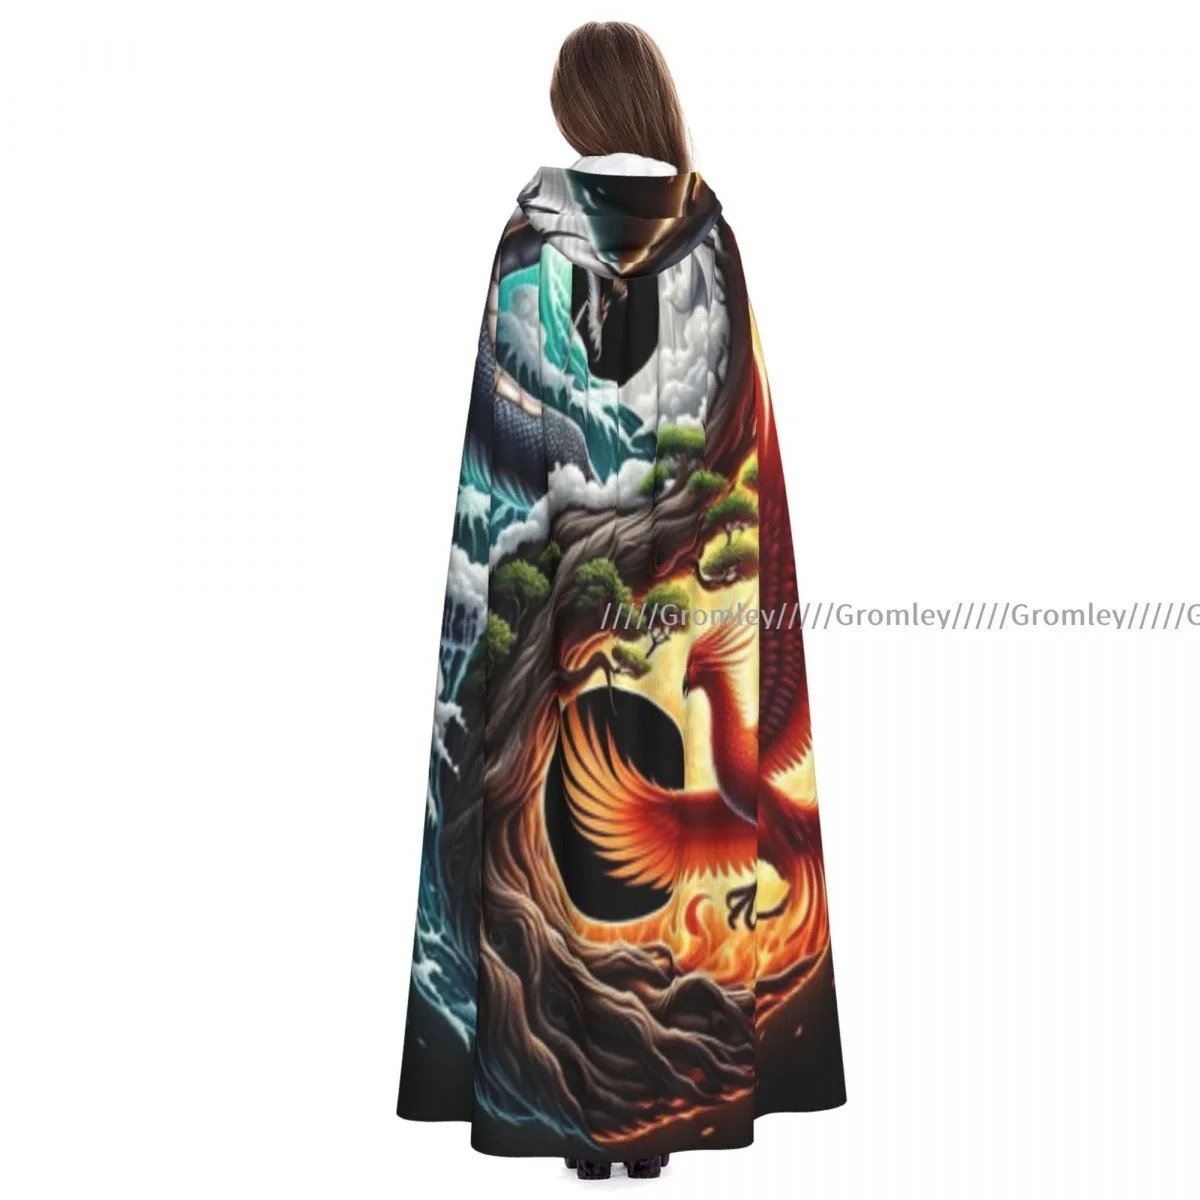 

Adult Dragon Phoenix Clouds Illustration Cloak Cape Hooded Medieval Costume Witch Wicca Vampire Halloween Costume Dress Coat